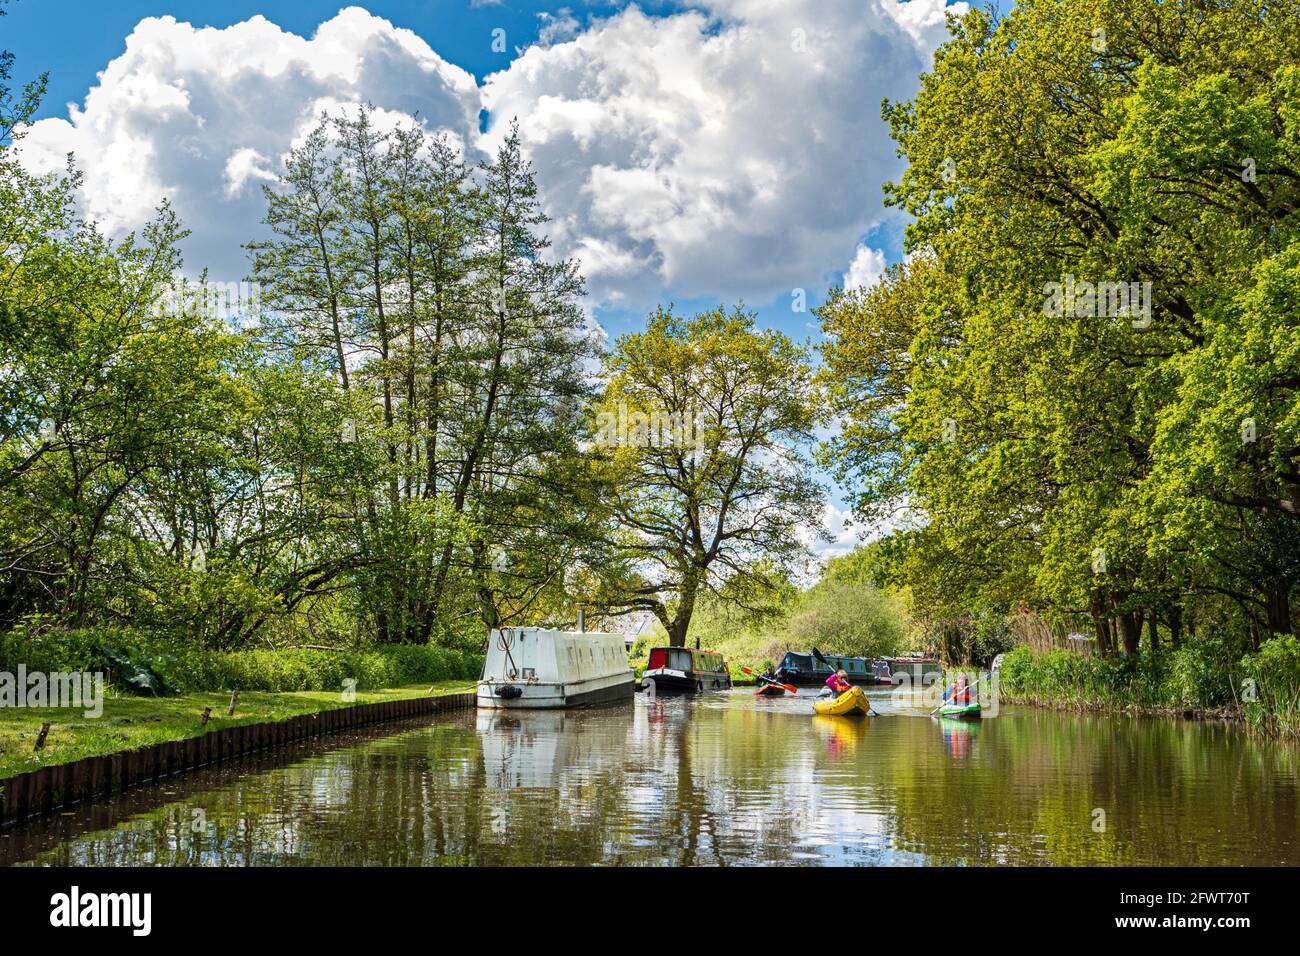 The River Wey, with staycation canoes group and traditional narrow boats on a sunny spring/summer day upstream from Papercourt Lock Ripley Surrey UK Stock Photo